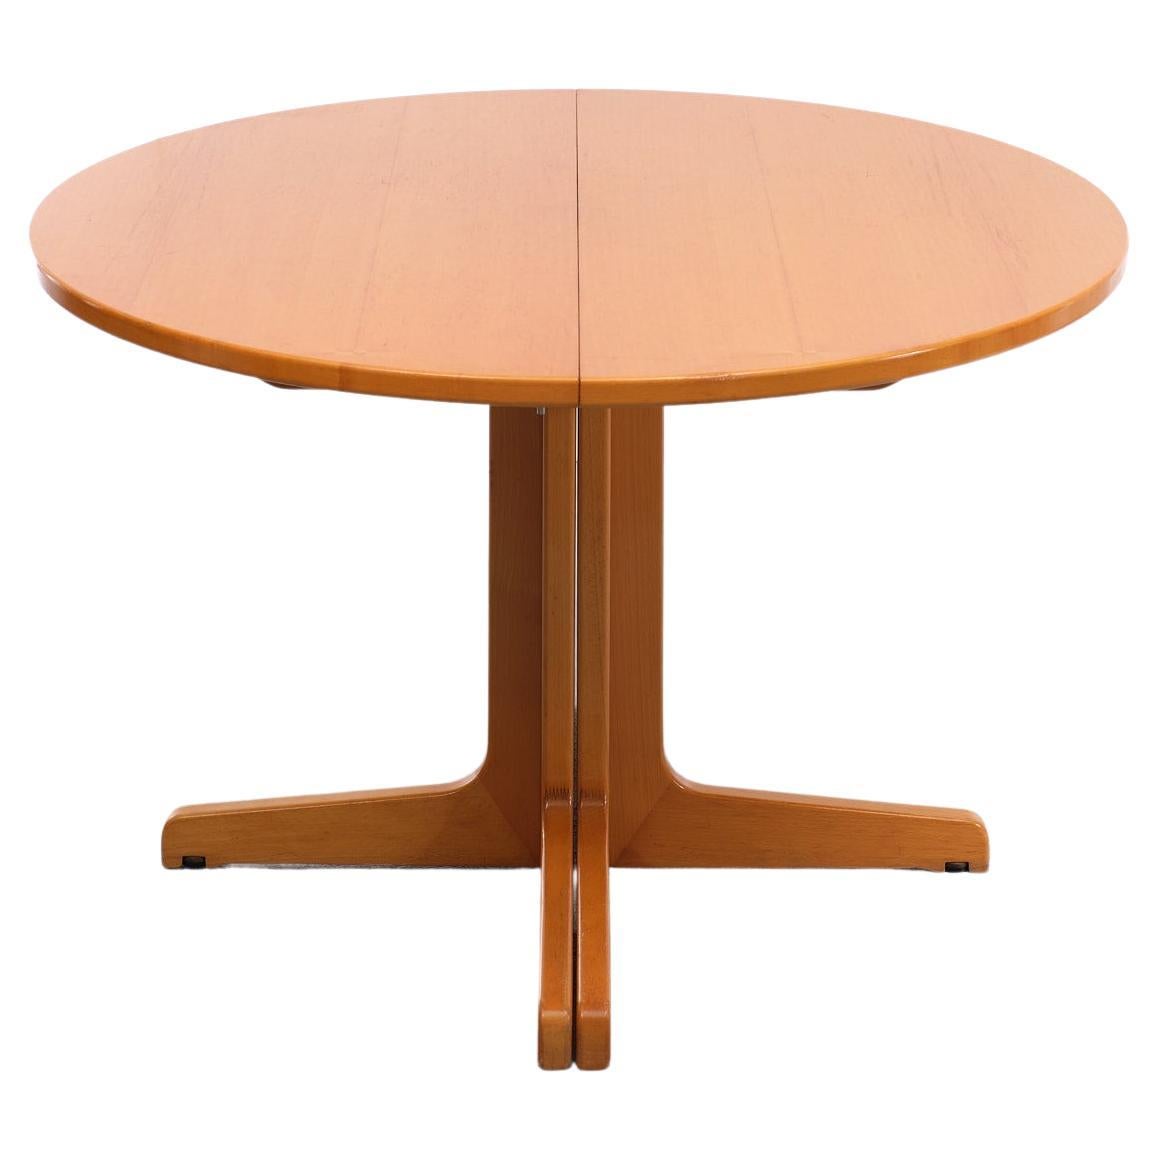 Beautiful extra large Thonet dining table . Very nice warm honing color .
The round dining table (diameter 120cm) can be extedended by adding two extension leaves to create an oval dining table of 170cm or 230cm long. The extension part are to be